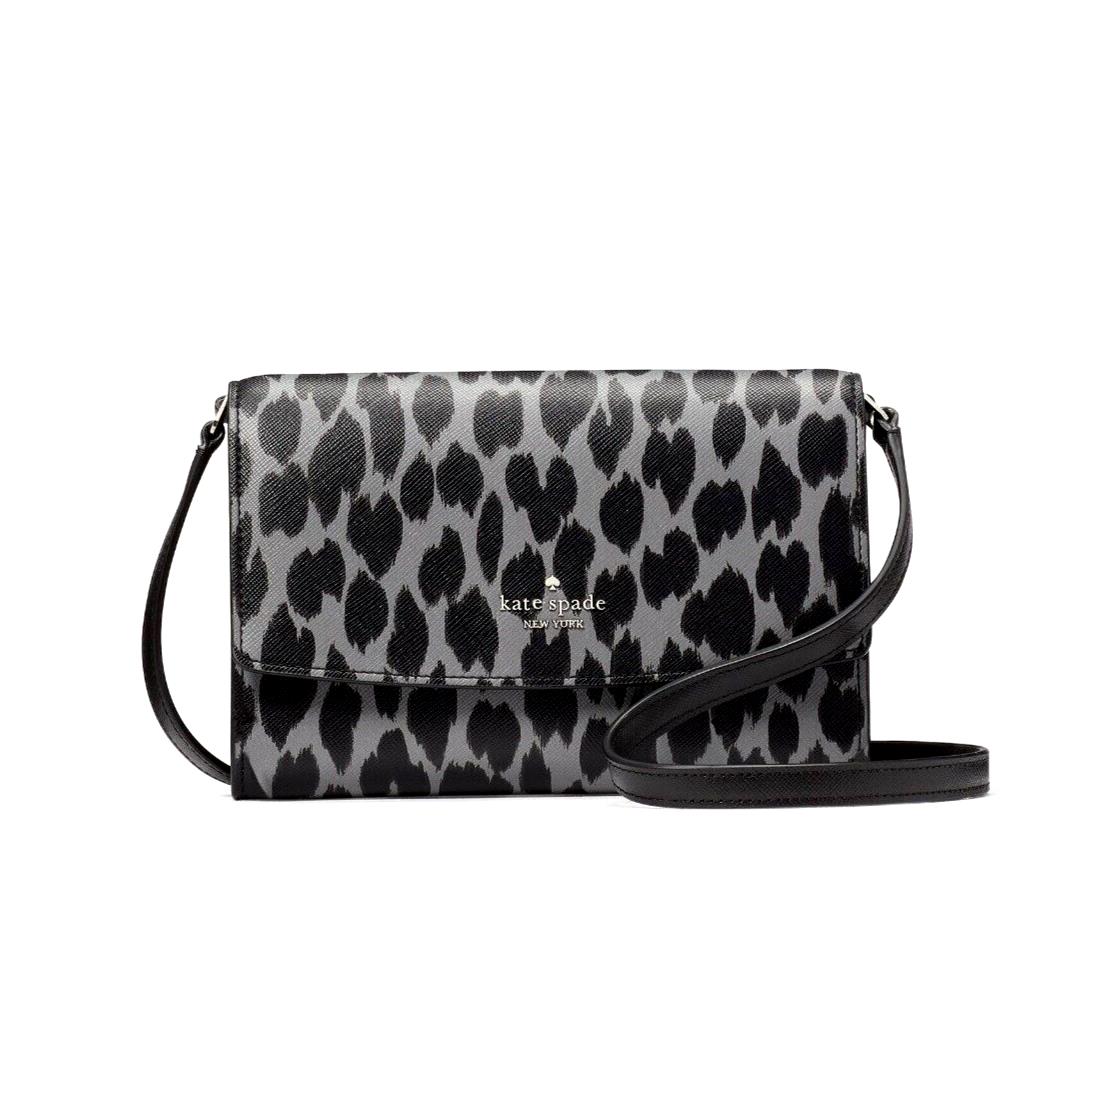 New Kate Spade Perry Crossbody Spotted Animal Printed Grey Multi with Dust Bag